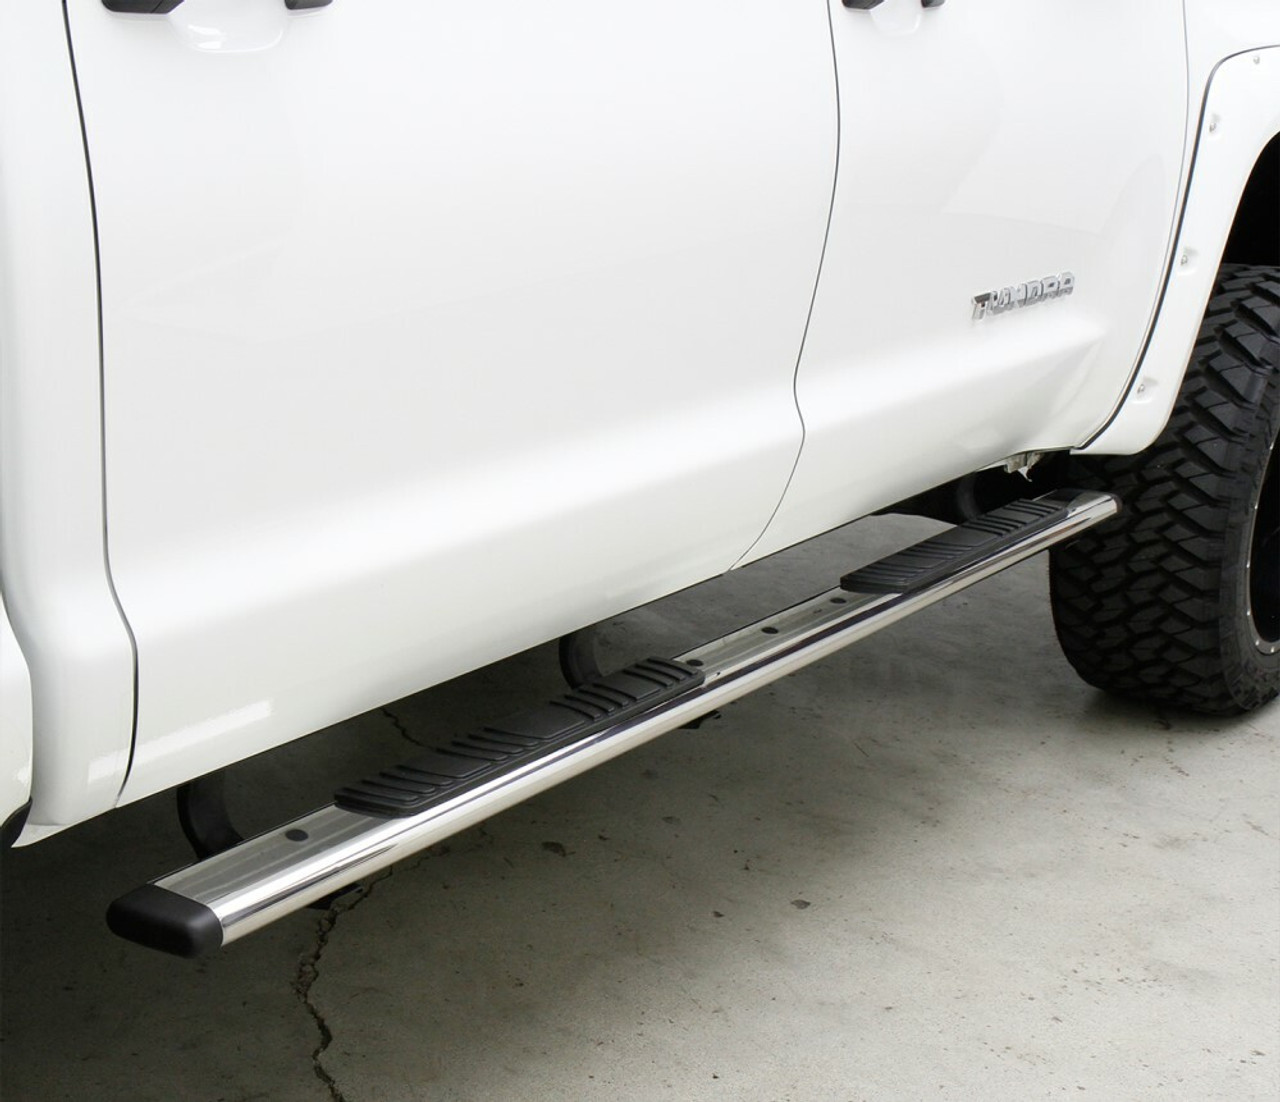 Go Rhino 685409952PS RAM 2500HD, 3500HD, 2010 - 2021, 5 inch OE Xtreme Low Profile - Complete Kit: Sidesteps + Brackets, Stainless steel, Polished, 650052PS side bars + 6840995 OE Xtreme Brackets. 5 inch wide x 52 inch long side bars